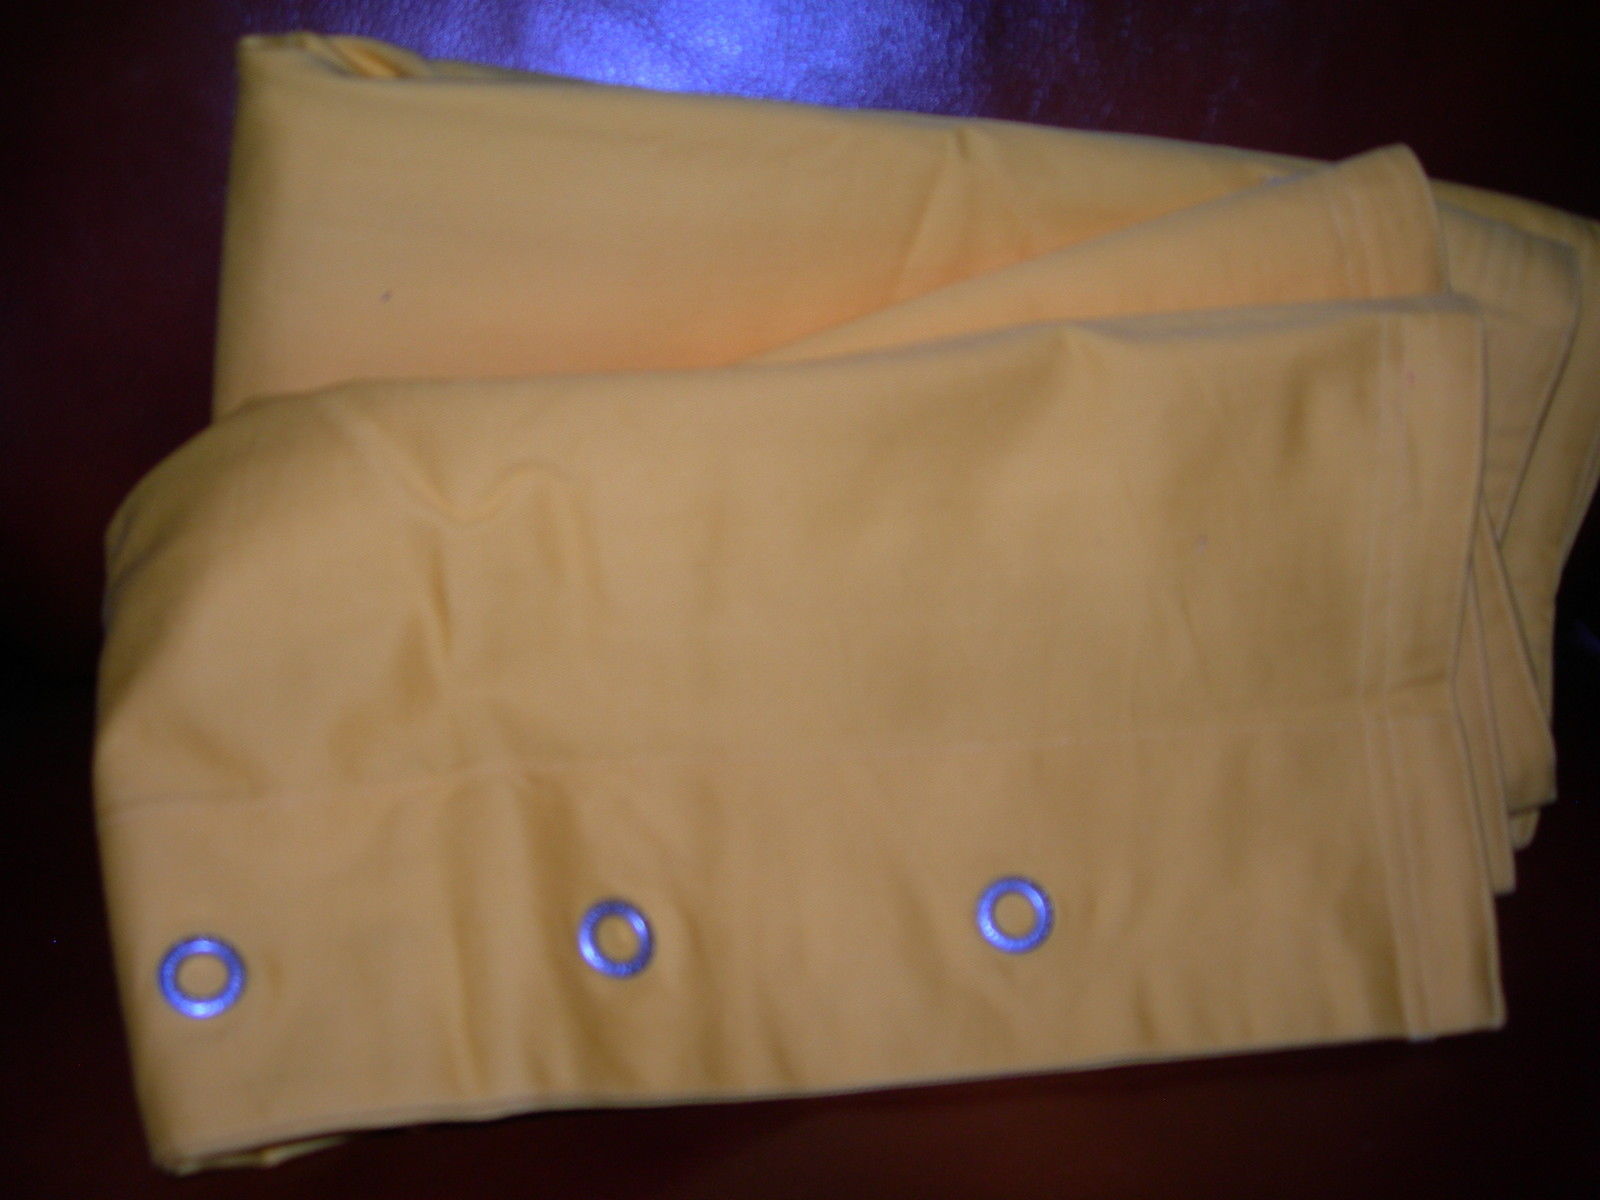 Tommy Hilfiger CLASSIC CHINO 2PC EURO SHAMS SET POSTER YELLOW SOLID  BNWOP - $79.19